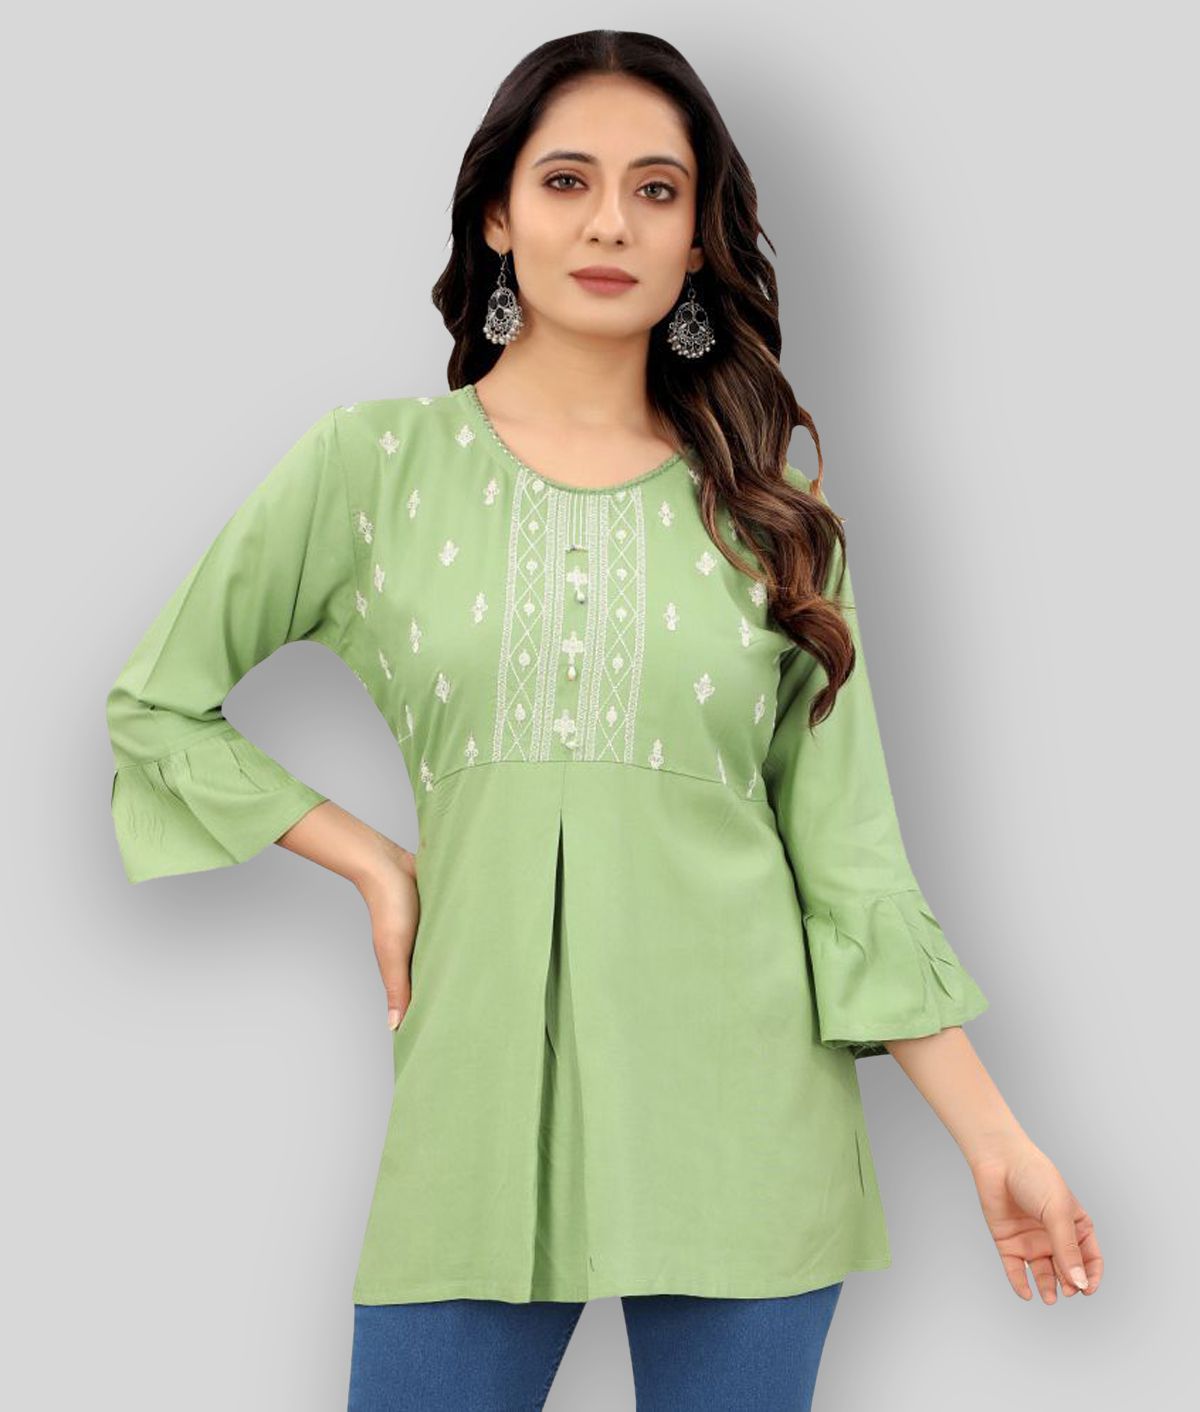     			dk life style - Green Rayon Women's Tunic ( Pack of 1 )